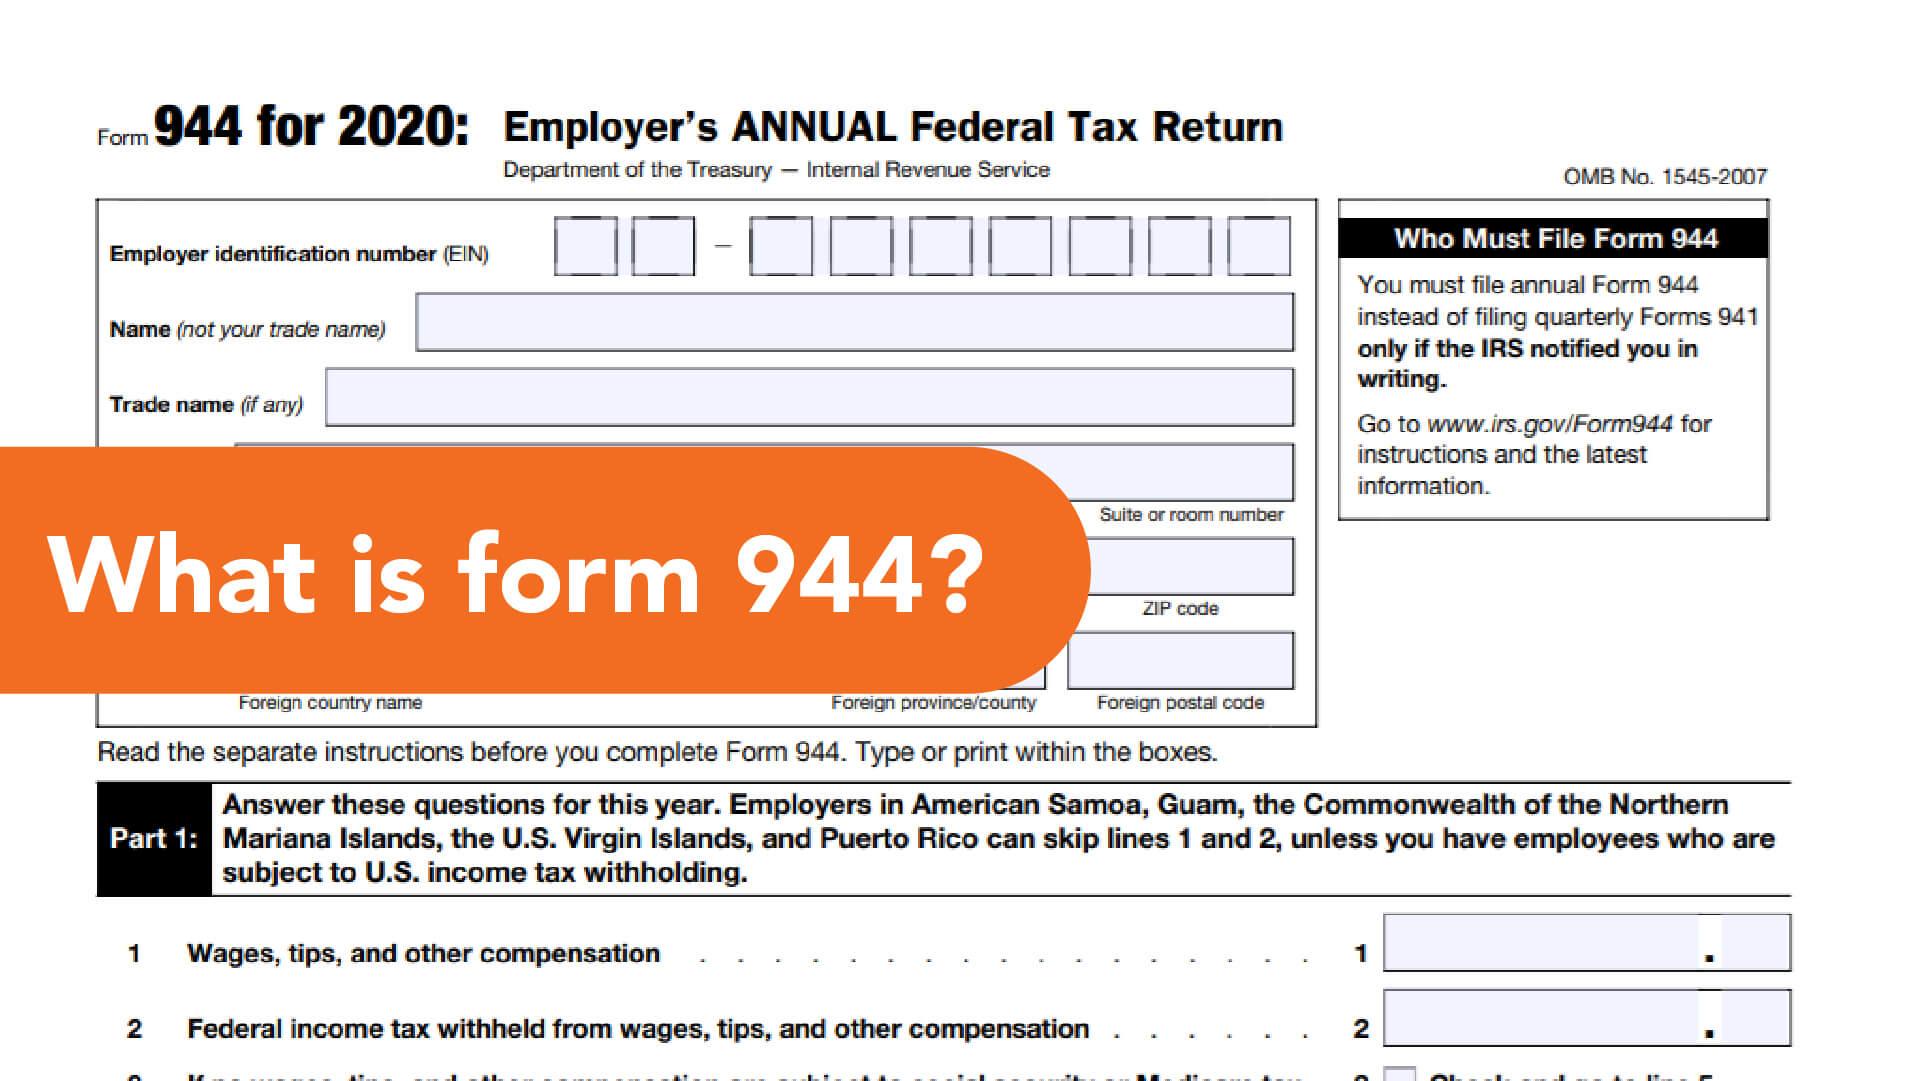 What is Form 944?